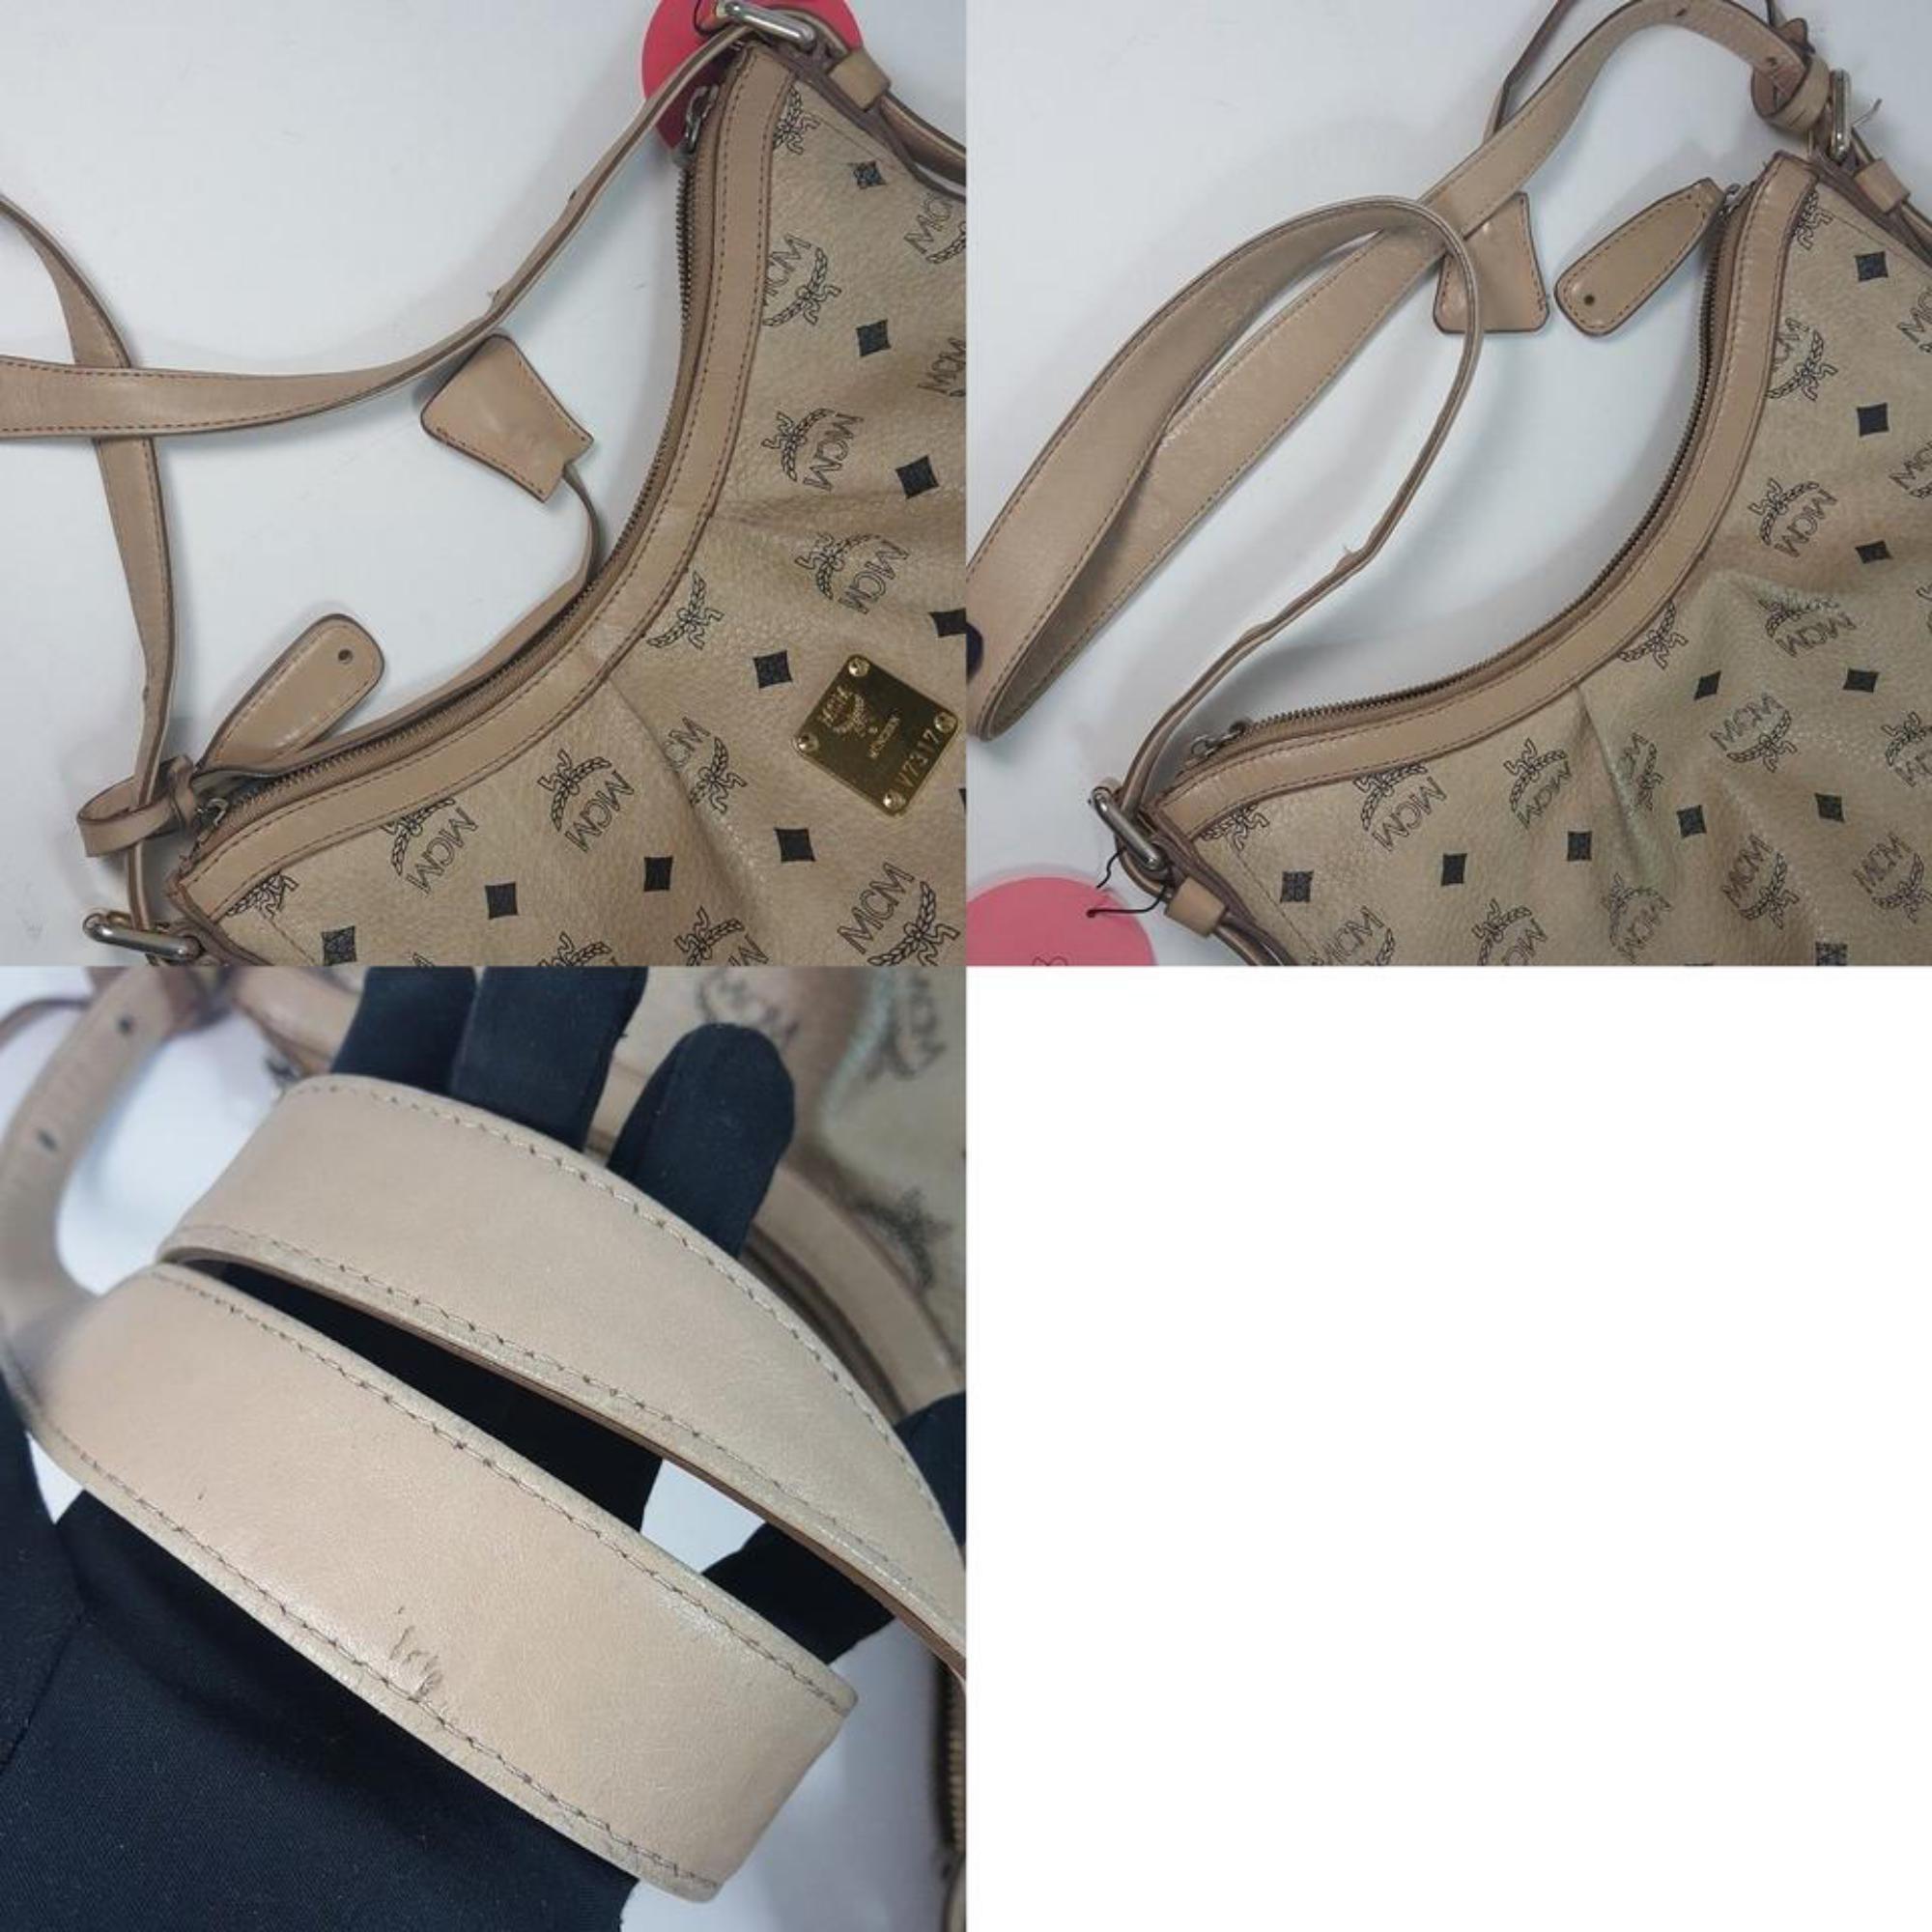 Brand : MCM
Style : Hobo Shoulder Bag
Model : Visetos Hobo Shoulder Bag Beige
Code : V7317
Material : Visetos Canvas
Color : Ext) Beige, Int) Brown
Country of Manufacture : Korea, Republic of
Size : W 13.3 x H 11 x D 4.7 Inch (W 34 x H 28 x D 12